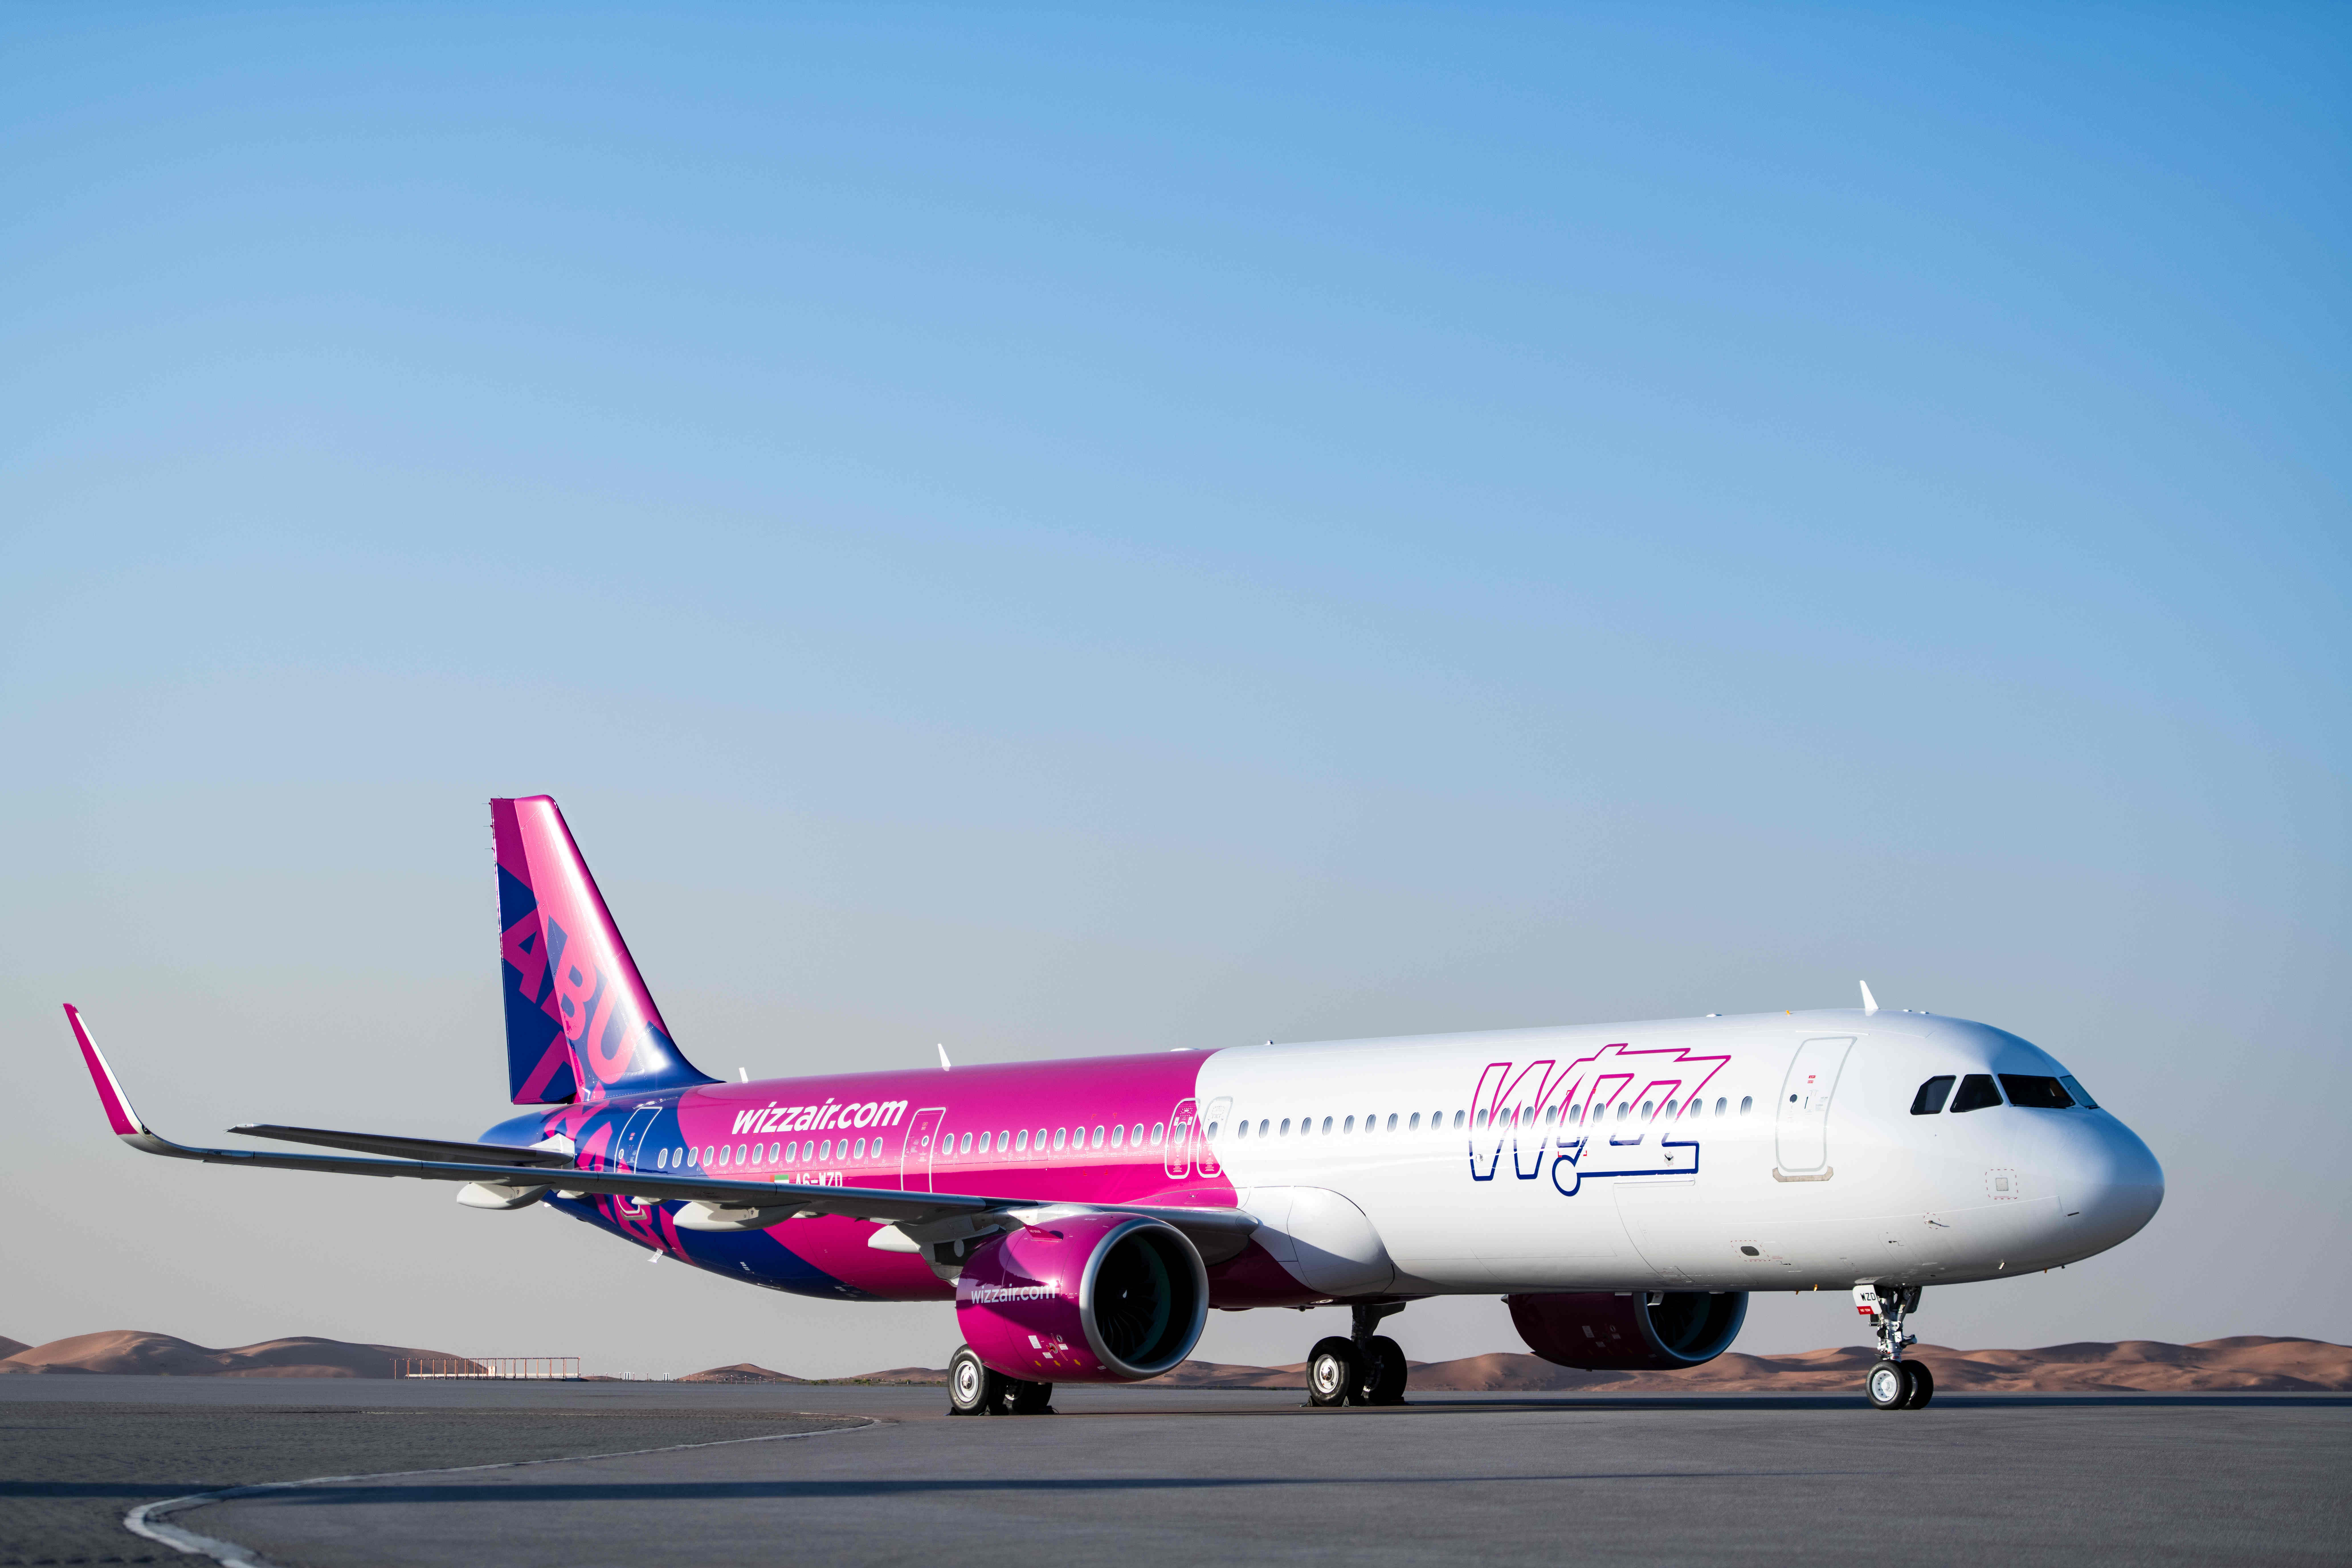 Wizz Air Abu Dhabi Launch An Exciting New Route To Erbil, Iraq